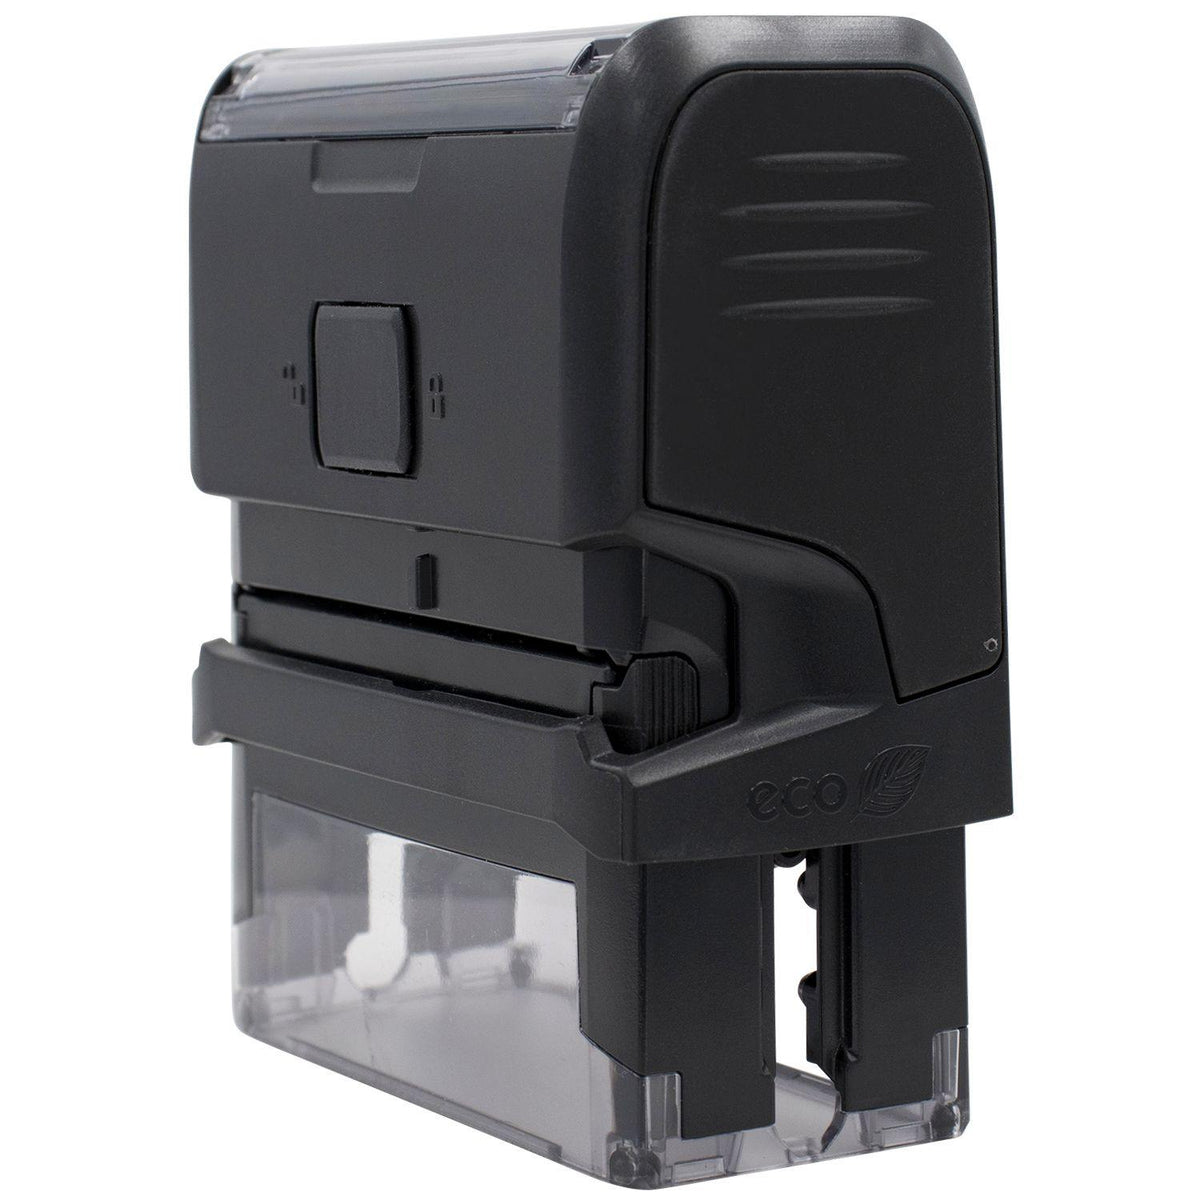 Large Self-Inking Special Services Stamp - Engineer Seal Stamps - Brand_Trodat, Impression Size_Large, Stamp Type_Self-Inking Stamp, Type of Use_Business, Type of Use_Postal &amp; Mailing